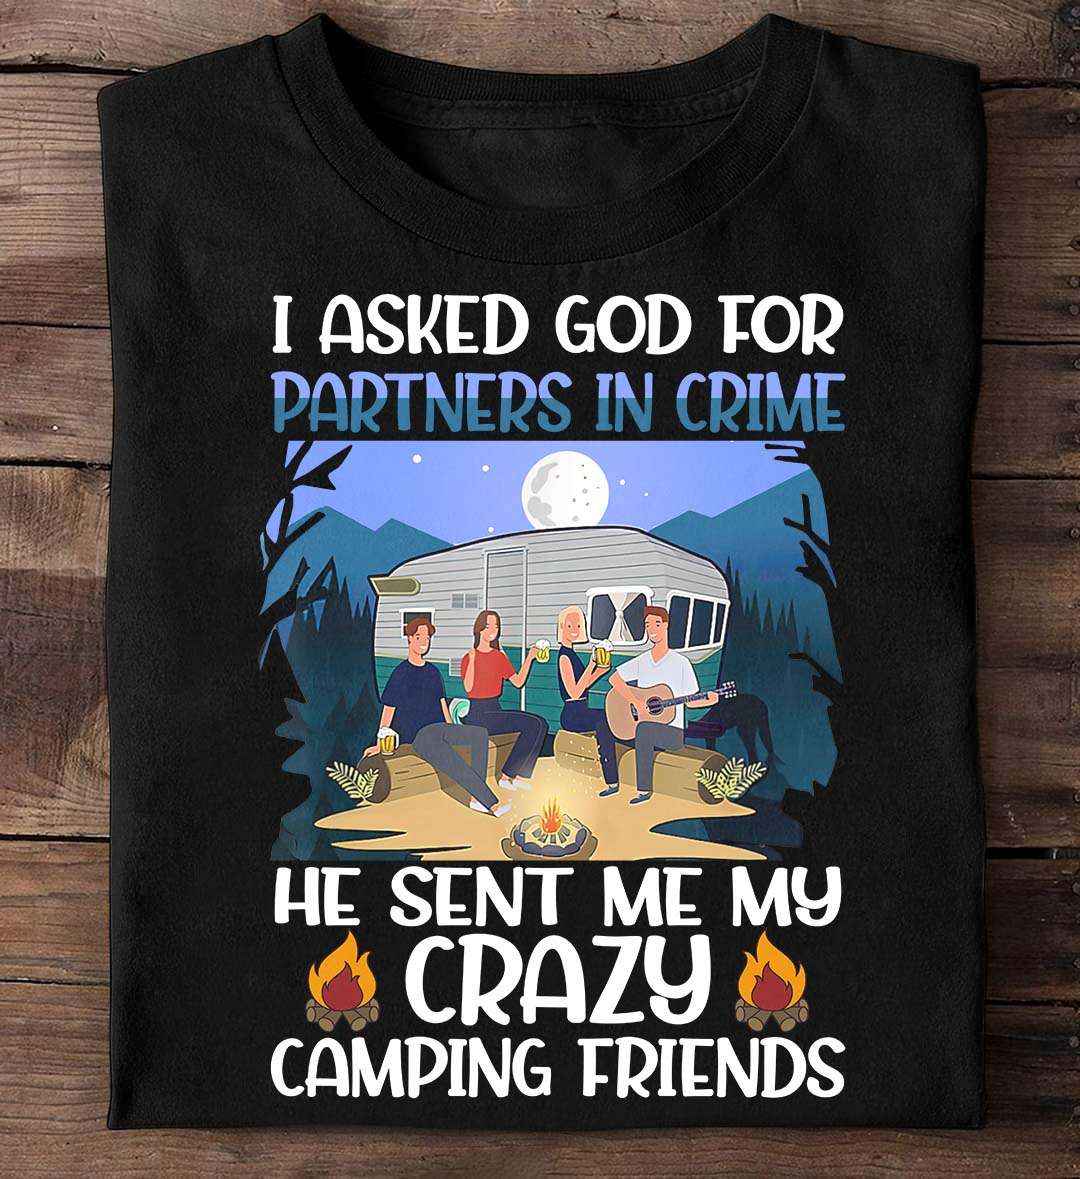 Camping With Friends - I asked god for partners in crime he sent mw my crazy camping friends